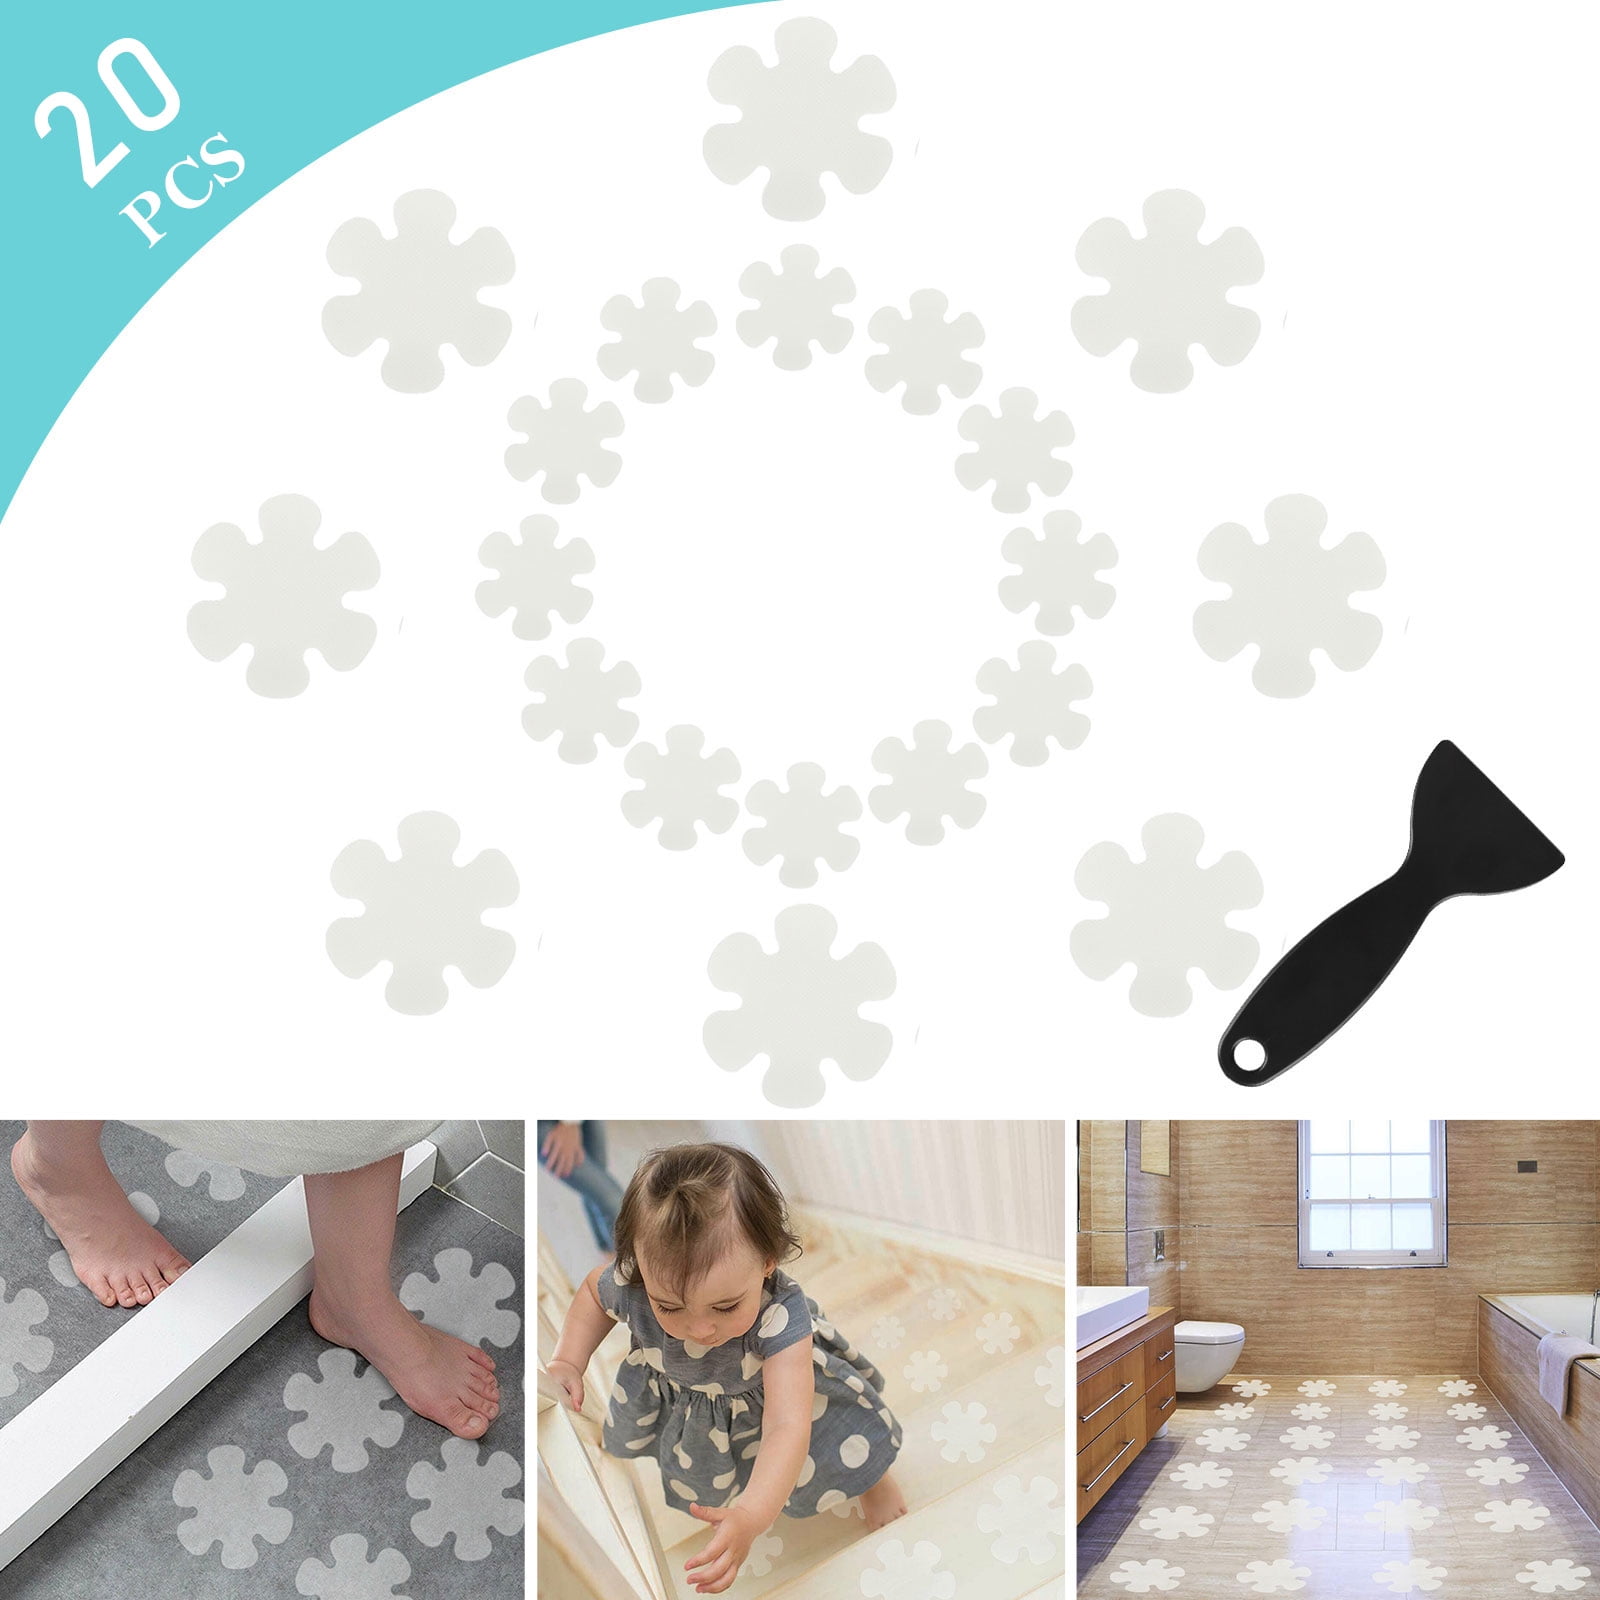 WINOMO 20pcs Anti-slip Tub Decal Safety Shower Treads Strips Adhesive Appliques Tub Sticker Floor Decals For Bathroom Home 